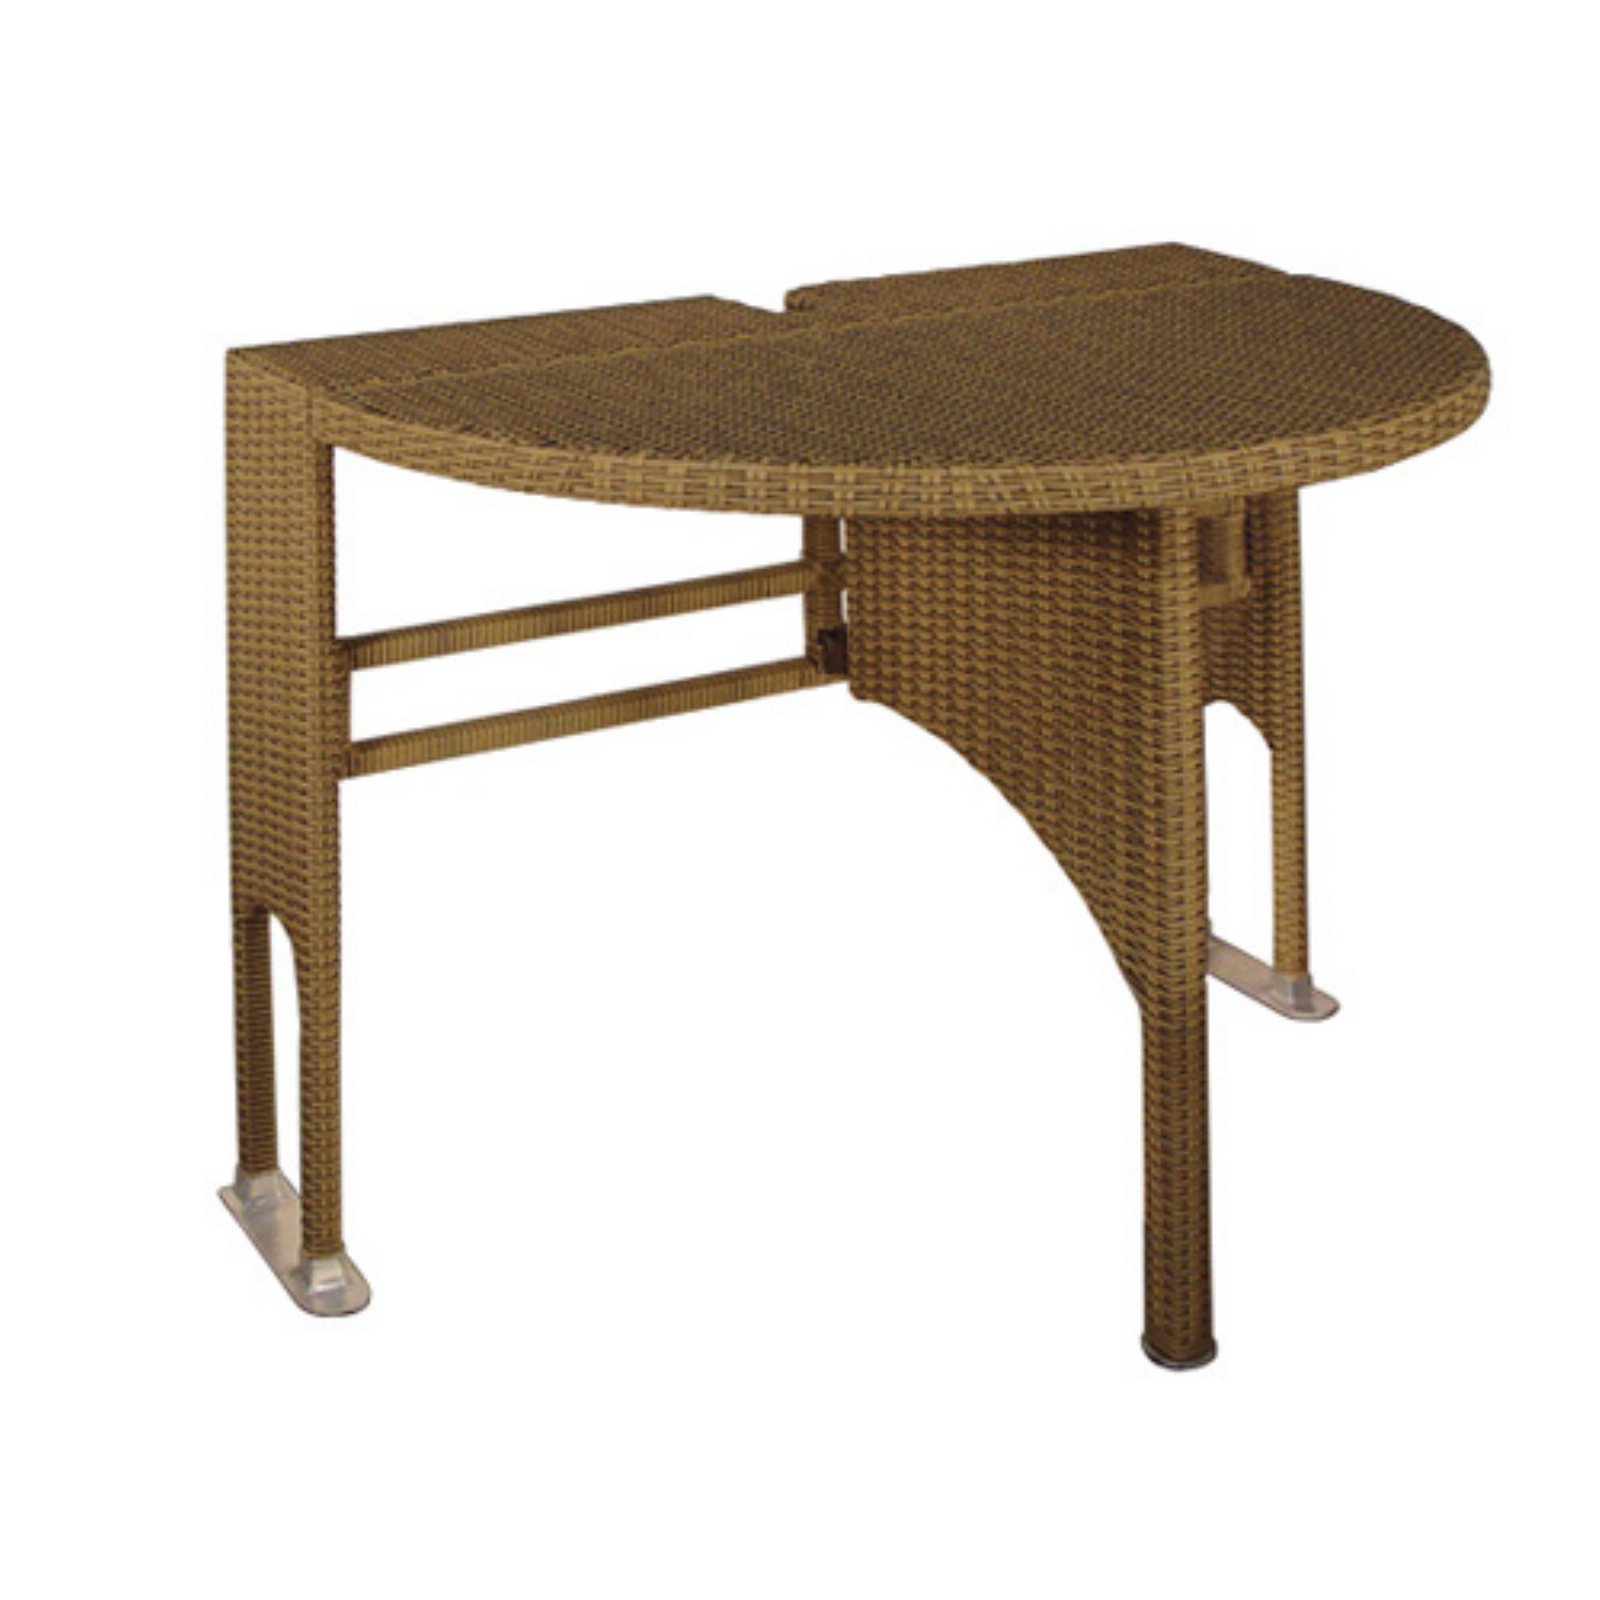 Blue Star Group Terrace Mates Adena All-Weather Wicker Coffee Color Table Set w/ 7.5'-Wide OFF-THE-WALL BRELLA - Teak Sunbrella Canopy - image 5 of 11